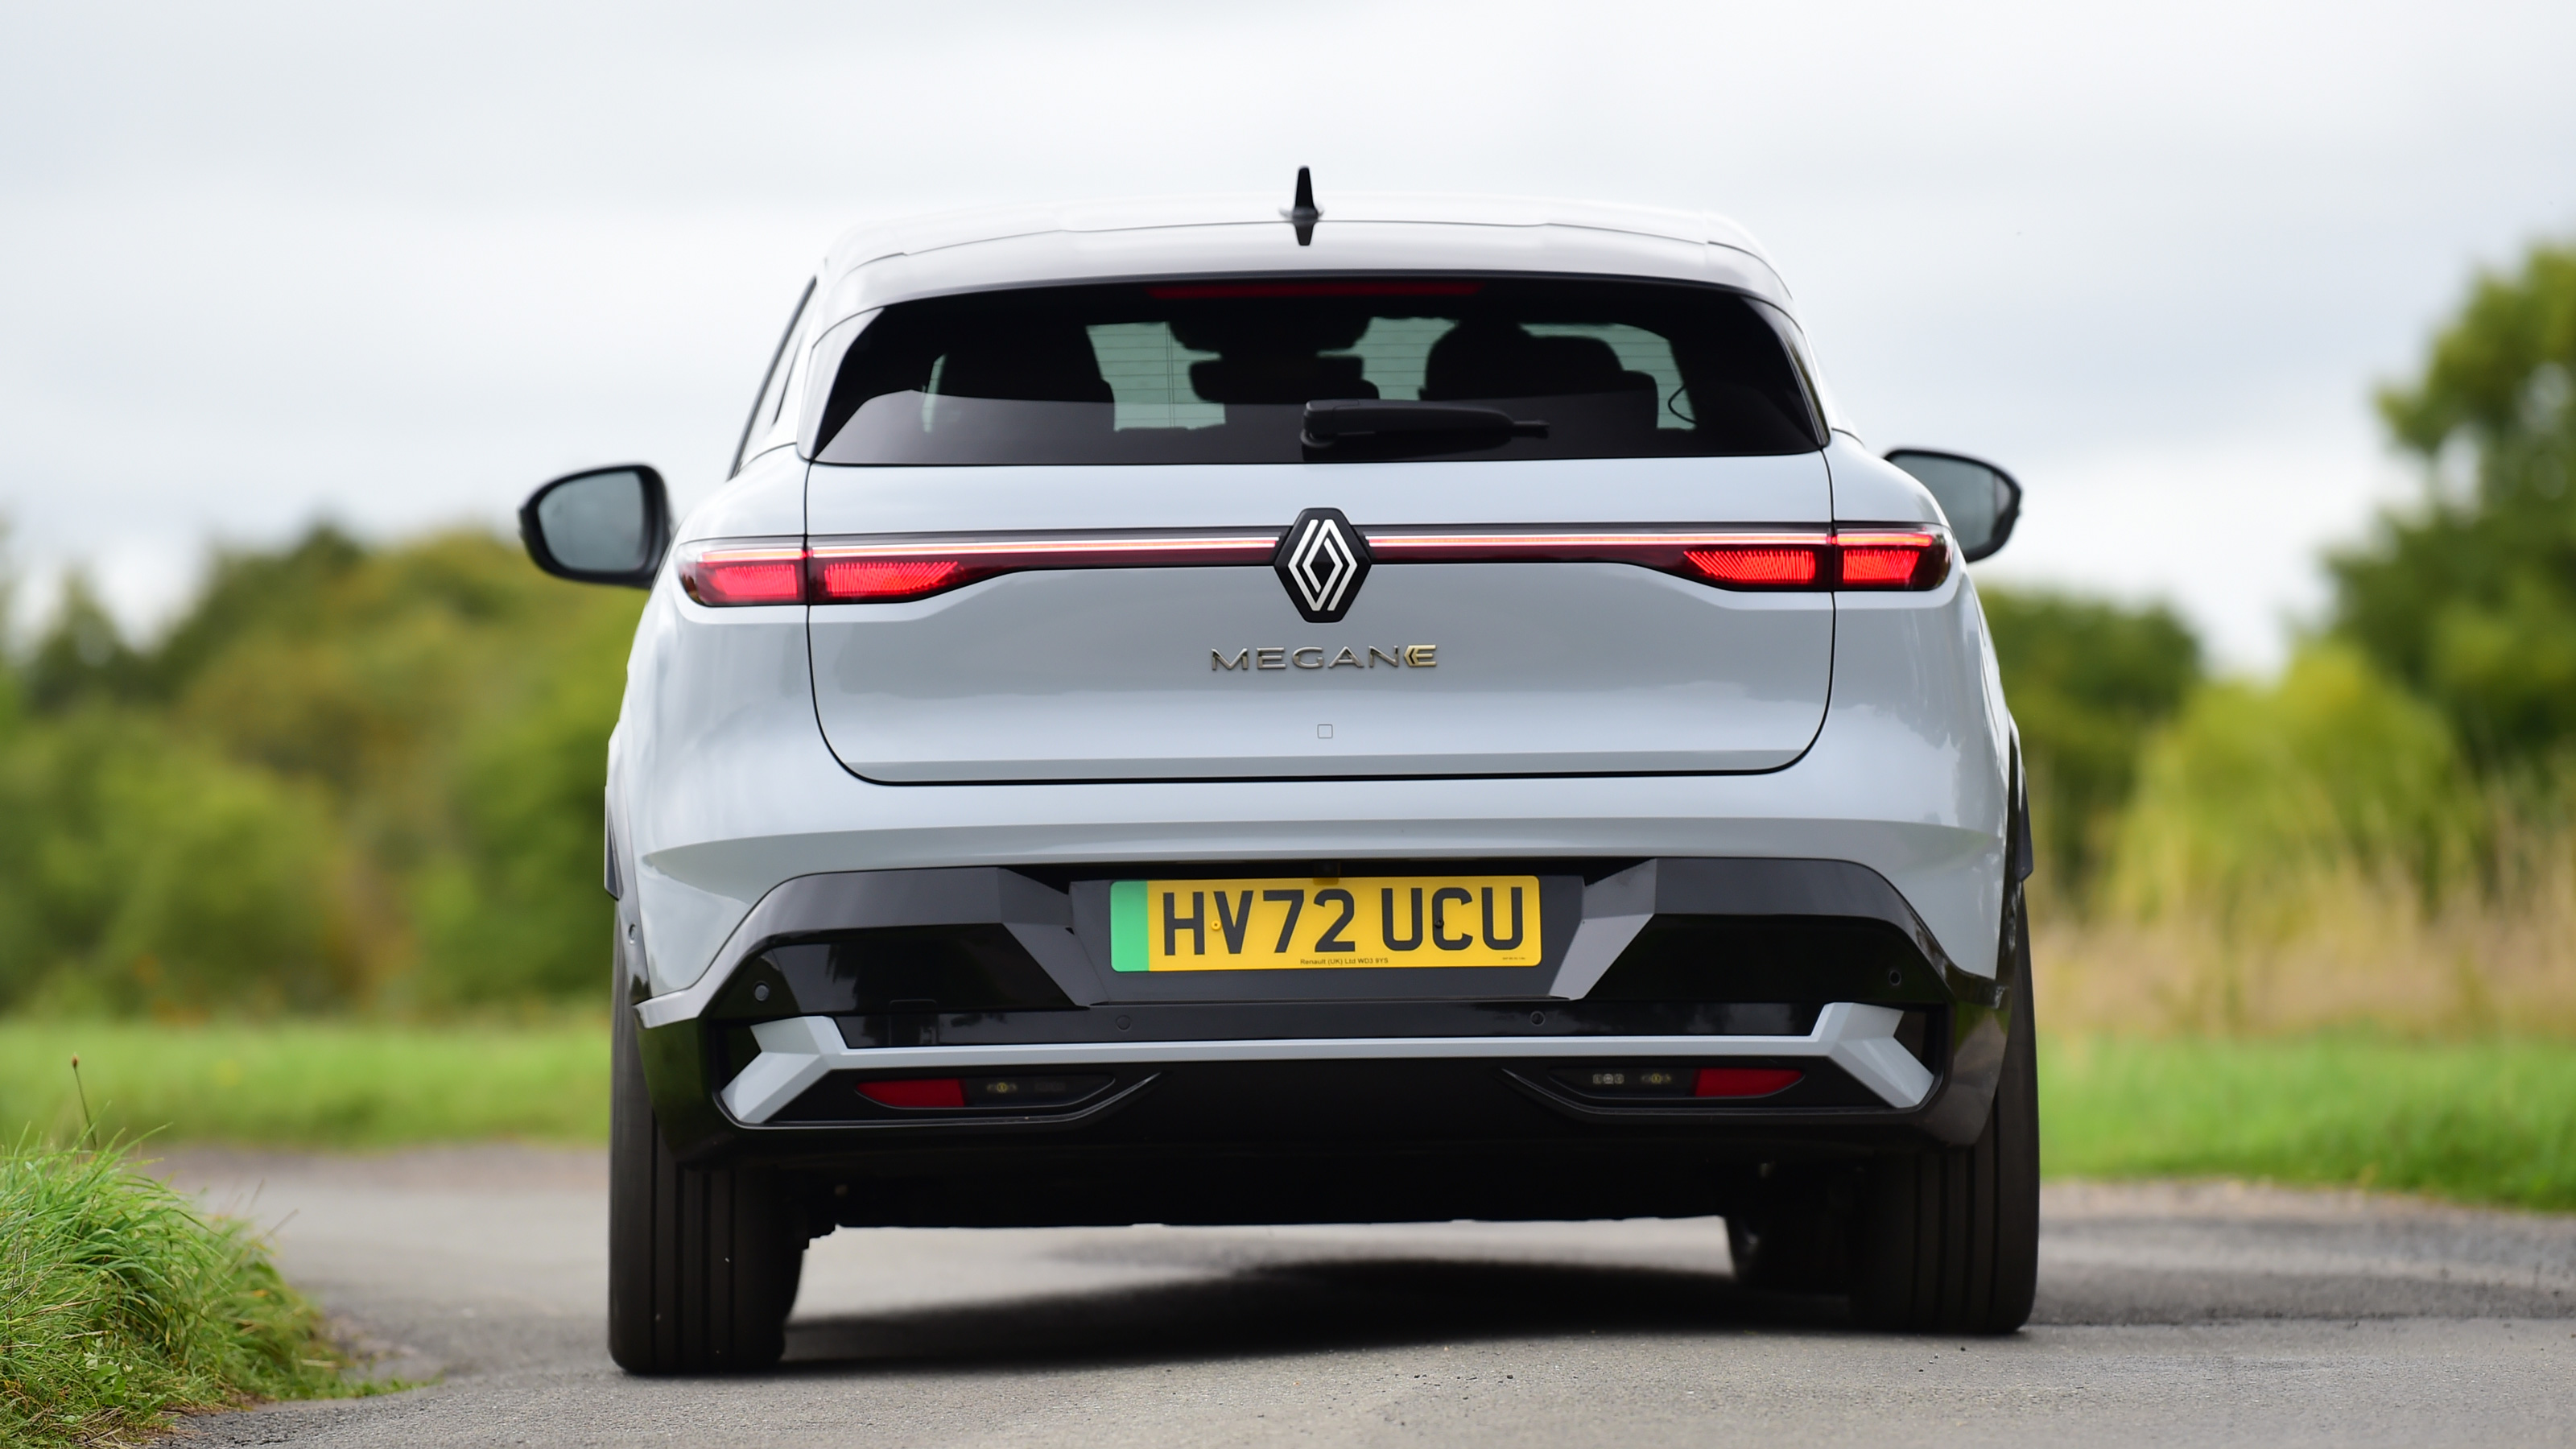 Renault Megane E-Tech first drive  desirable, practical and cost